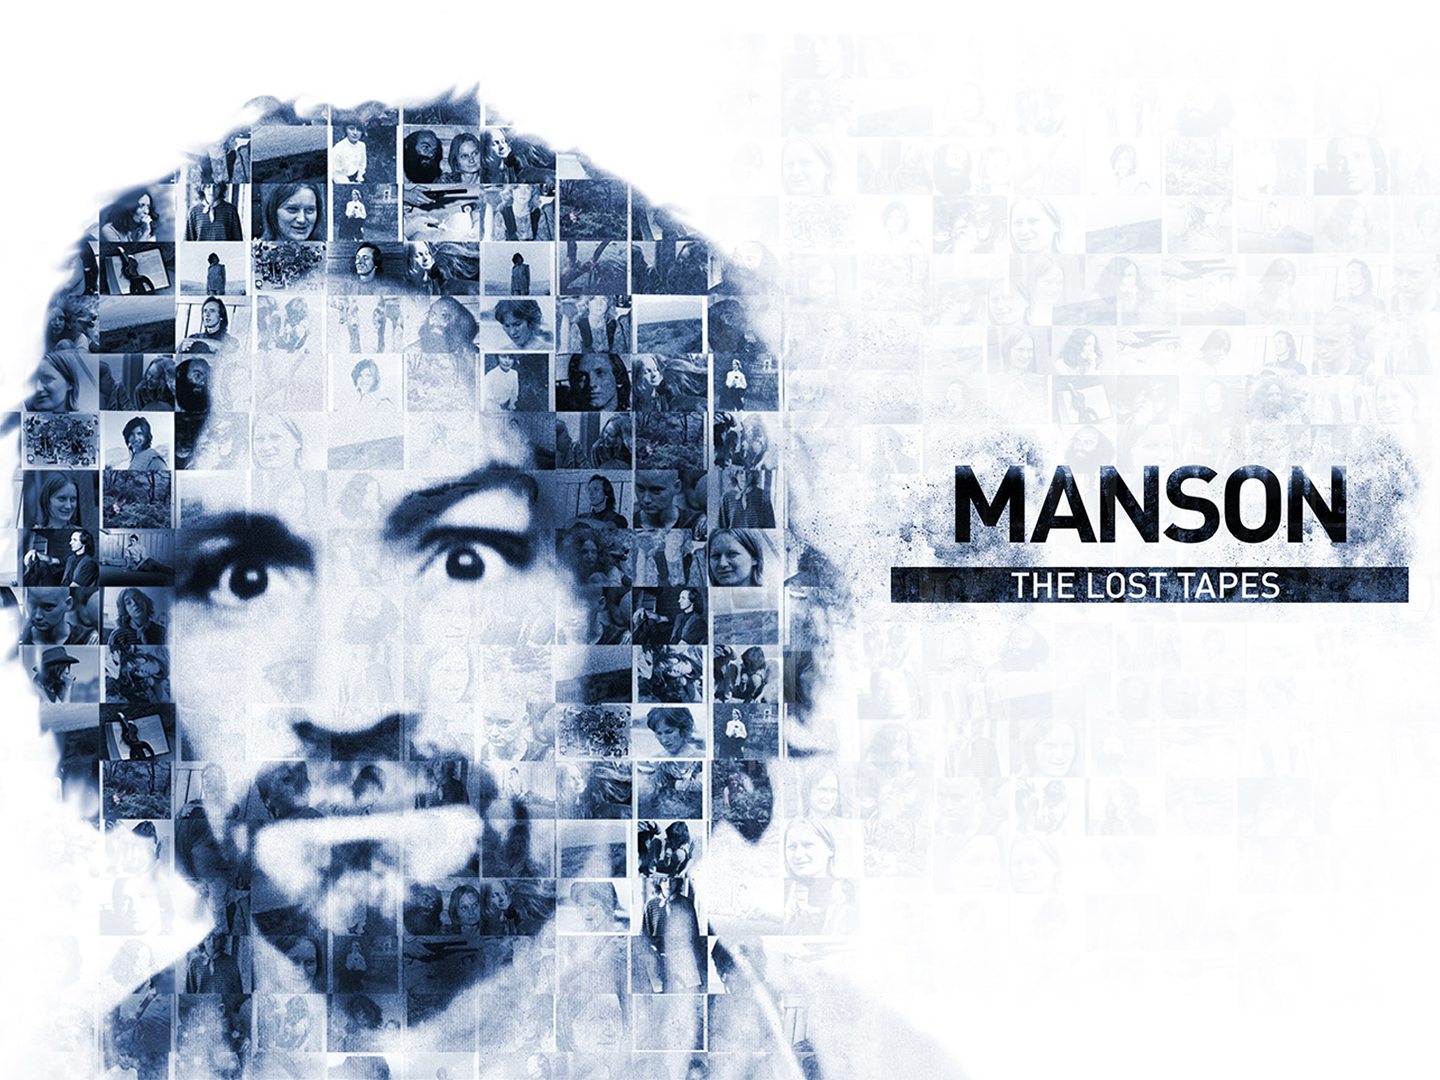 Watch Manson: The Lost Tapes Online | Season 1 on NEON.